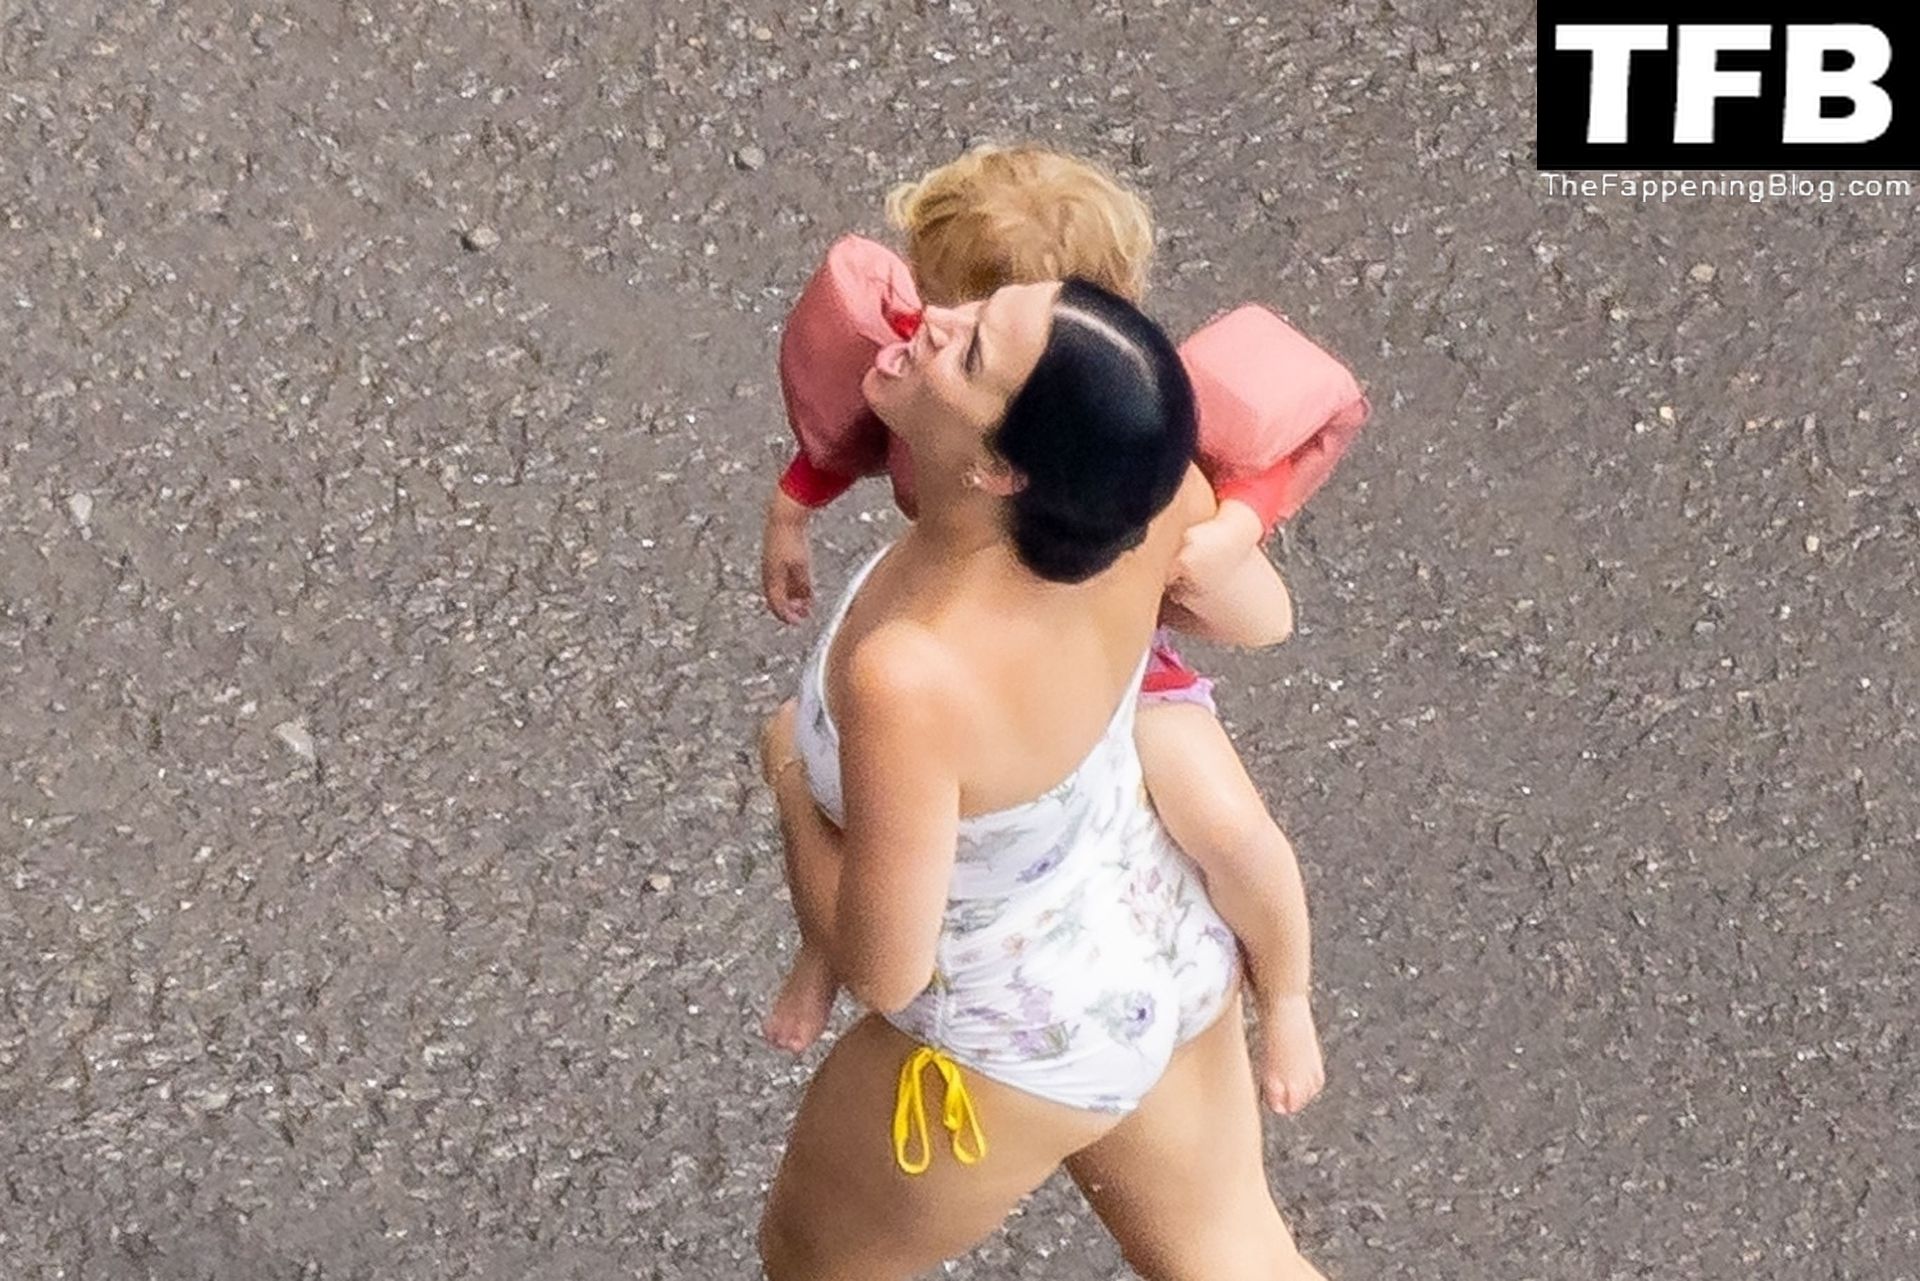 Katy Perry Sexy The Fappening Blog 31 - Katy Perry Rocks a Strapless Swimsuit While Enjoying a Beach Day with Orlando Bloom in Positano (105 Photos)